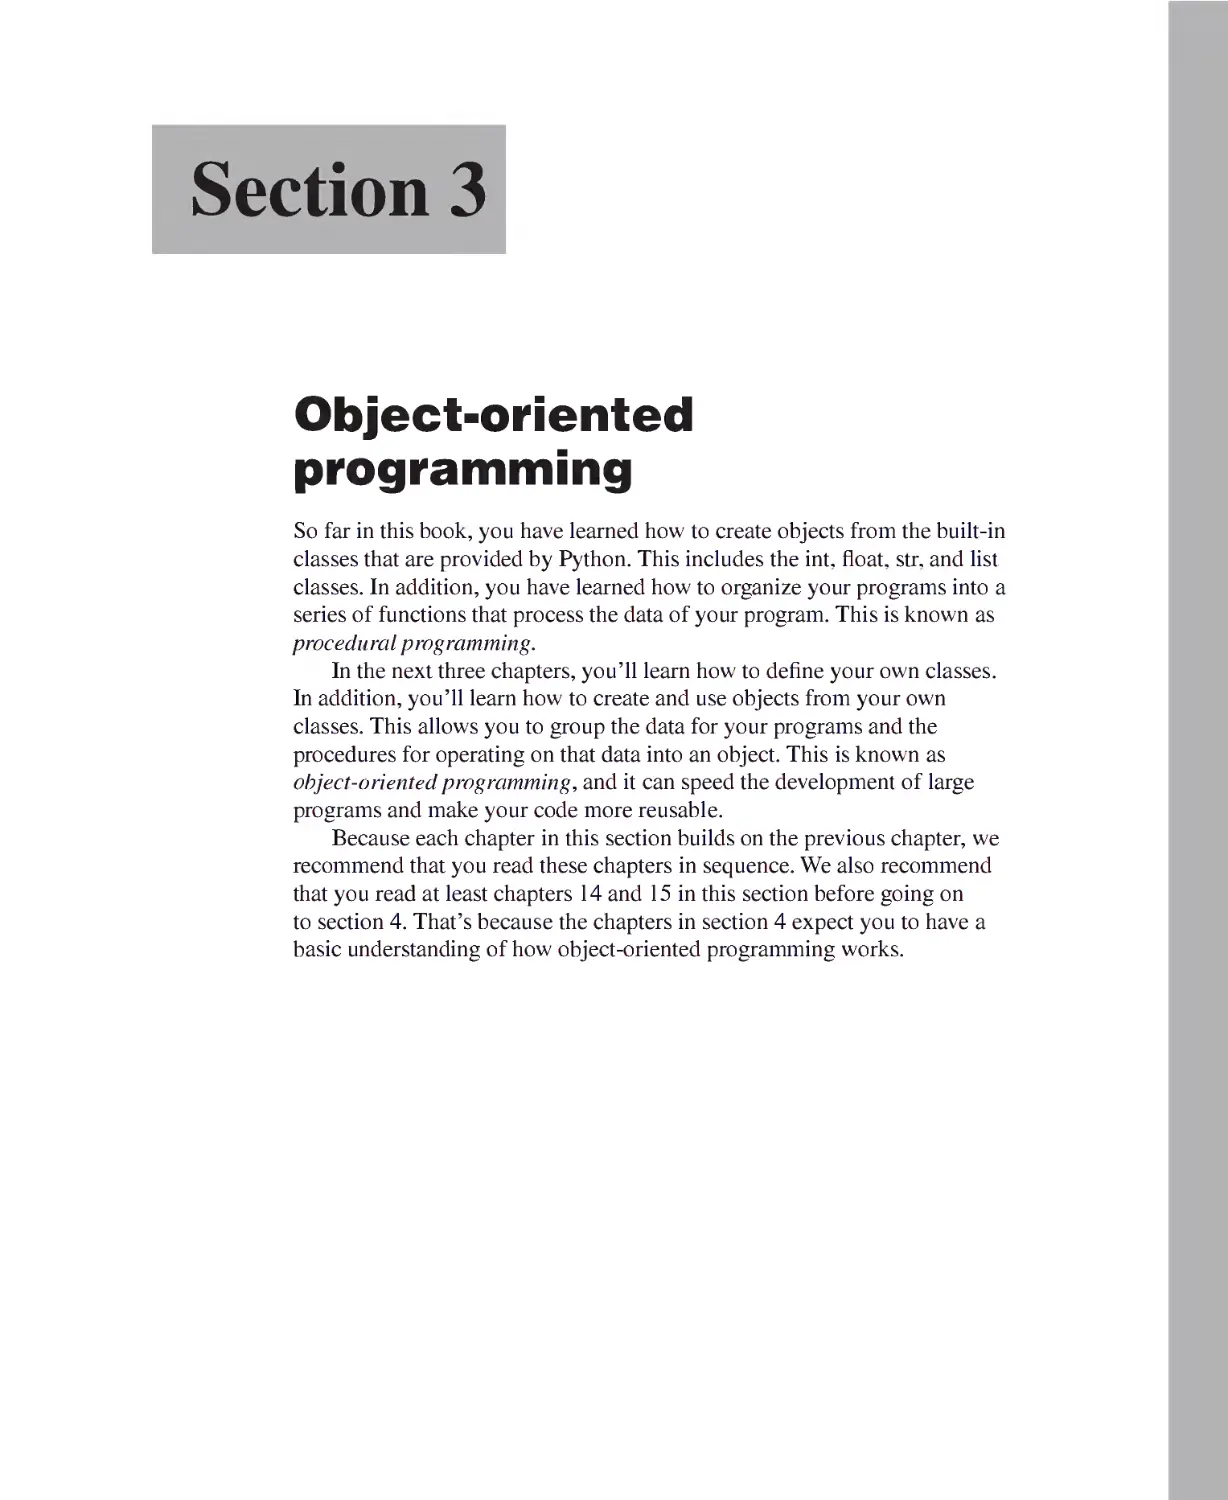 Section 3 - Object-Oriented Programming